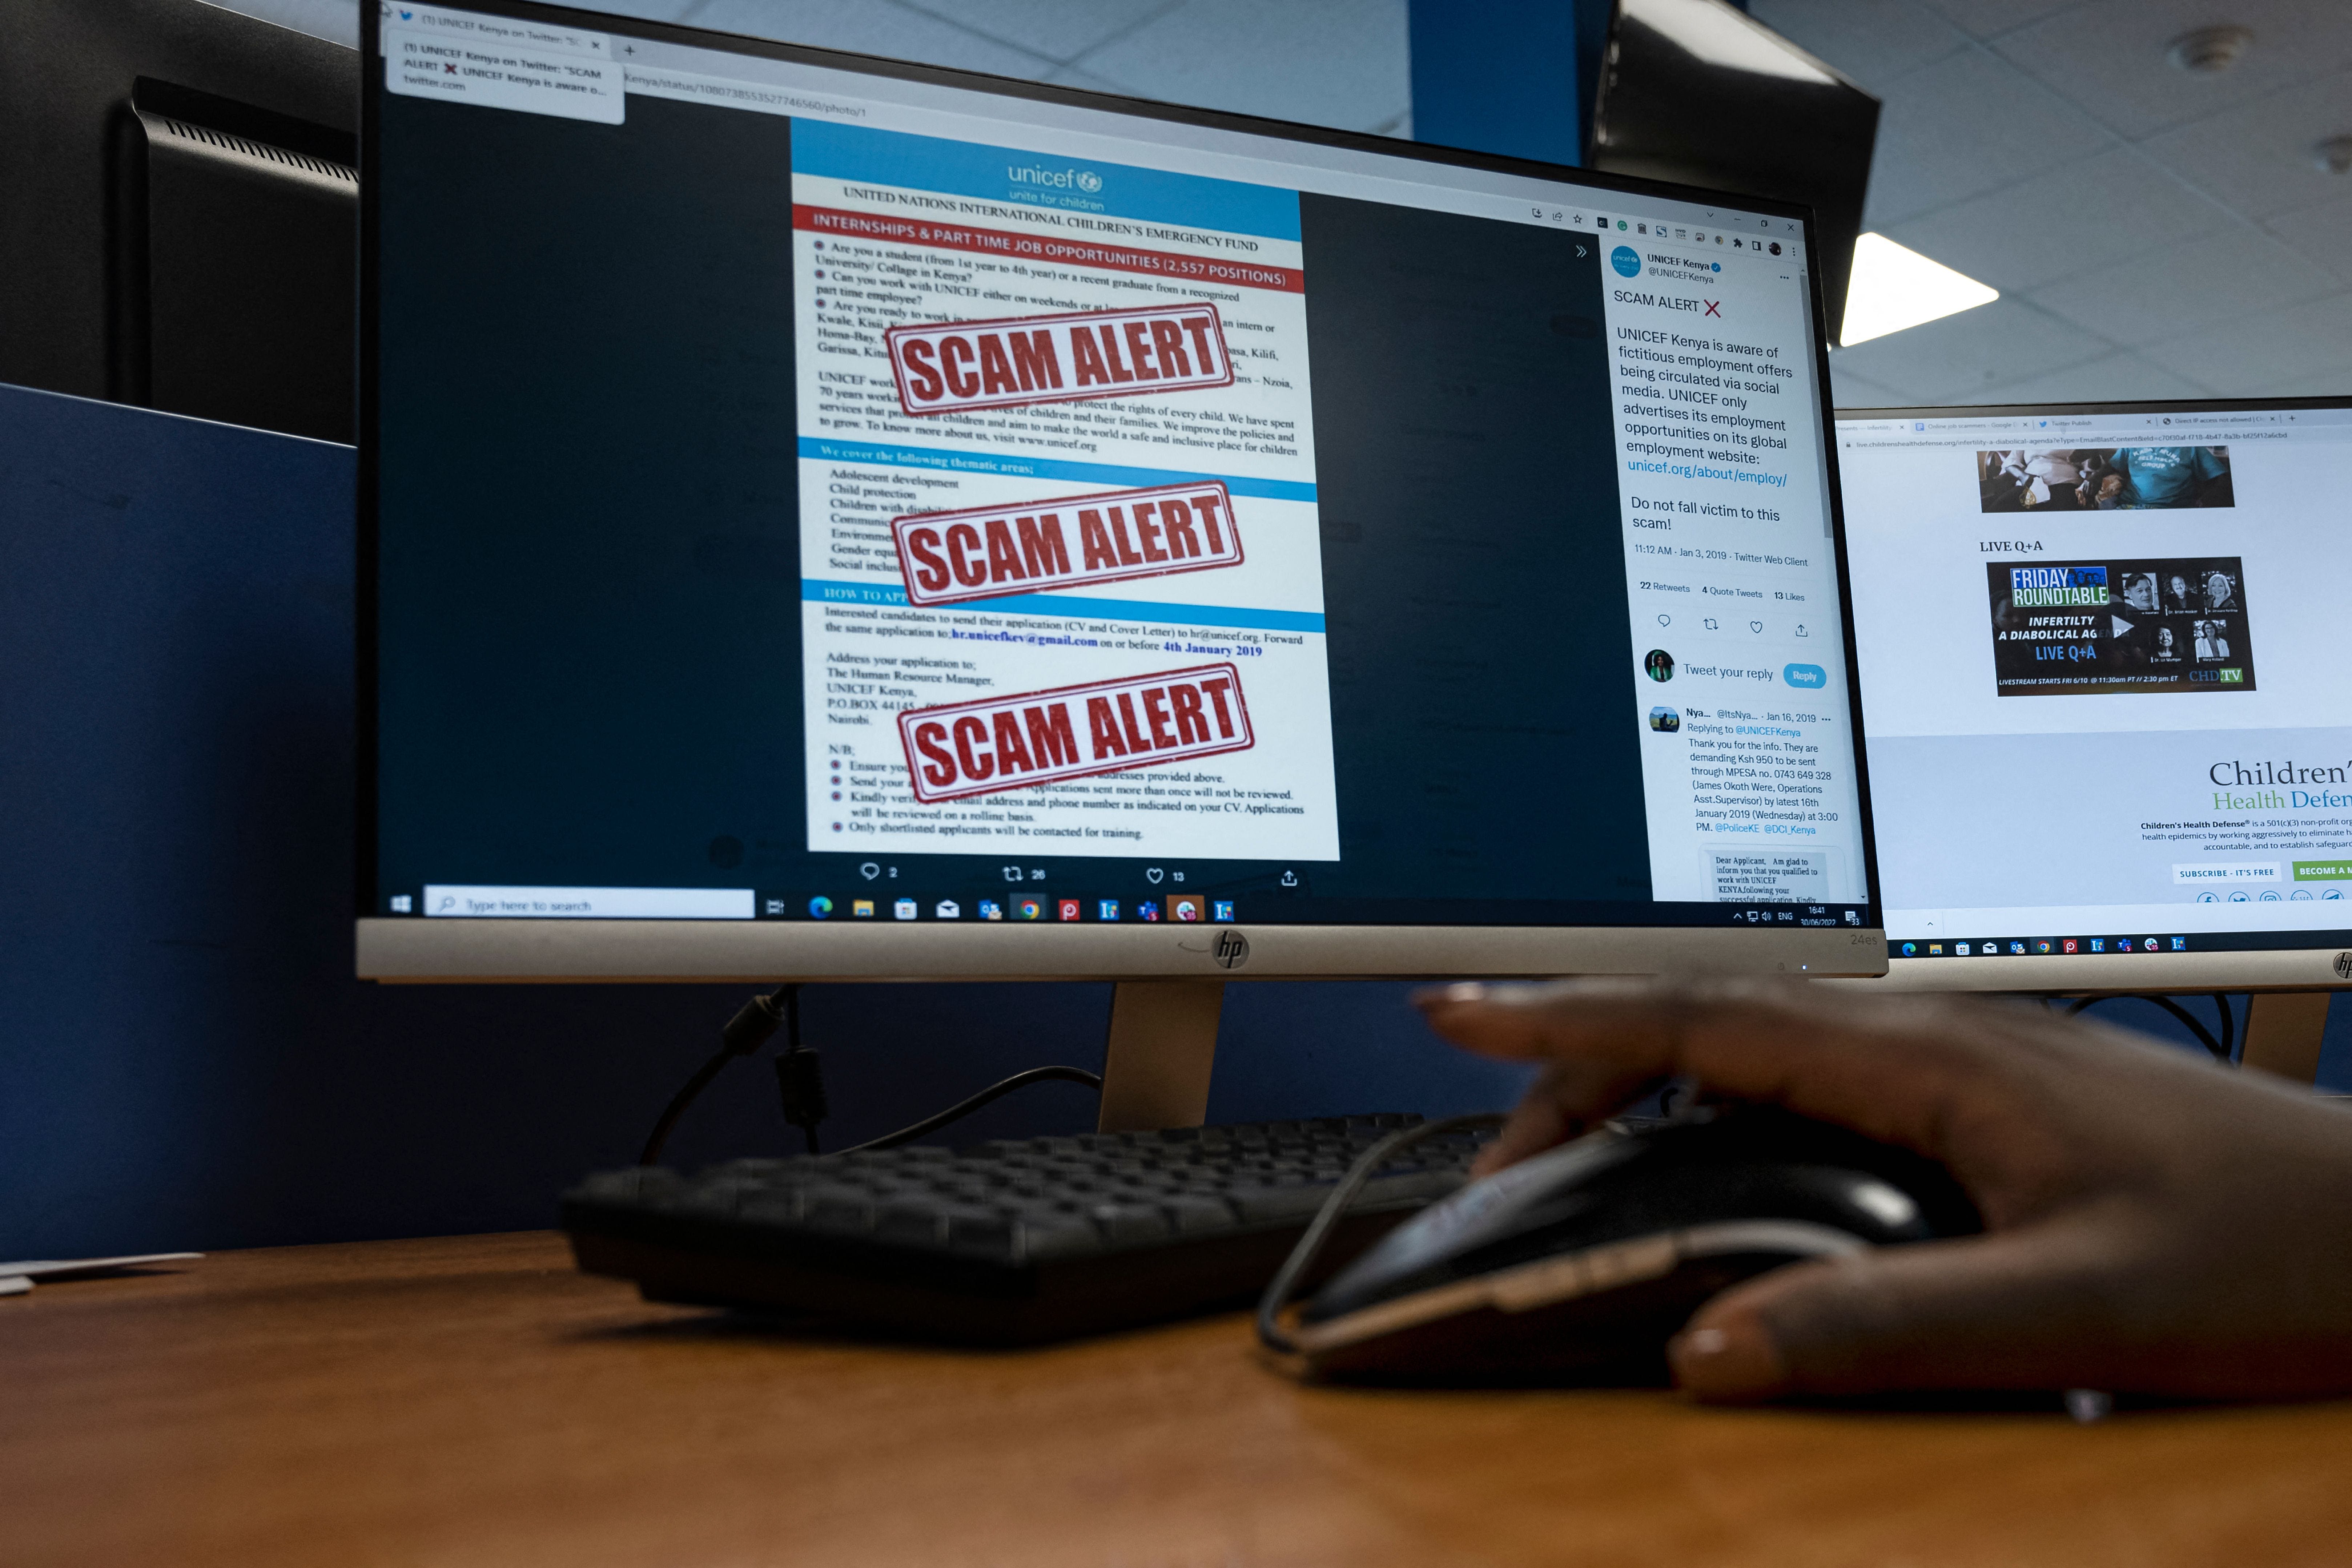 Beware of scams targeting senior citizens: Here's tips to protect yourself or a loved one